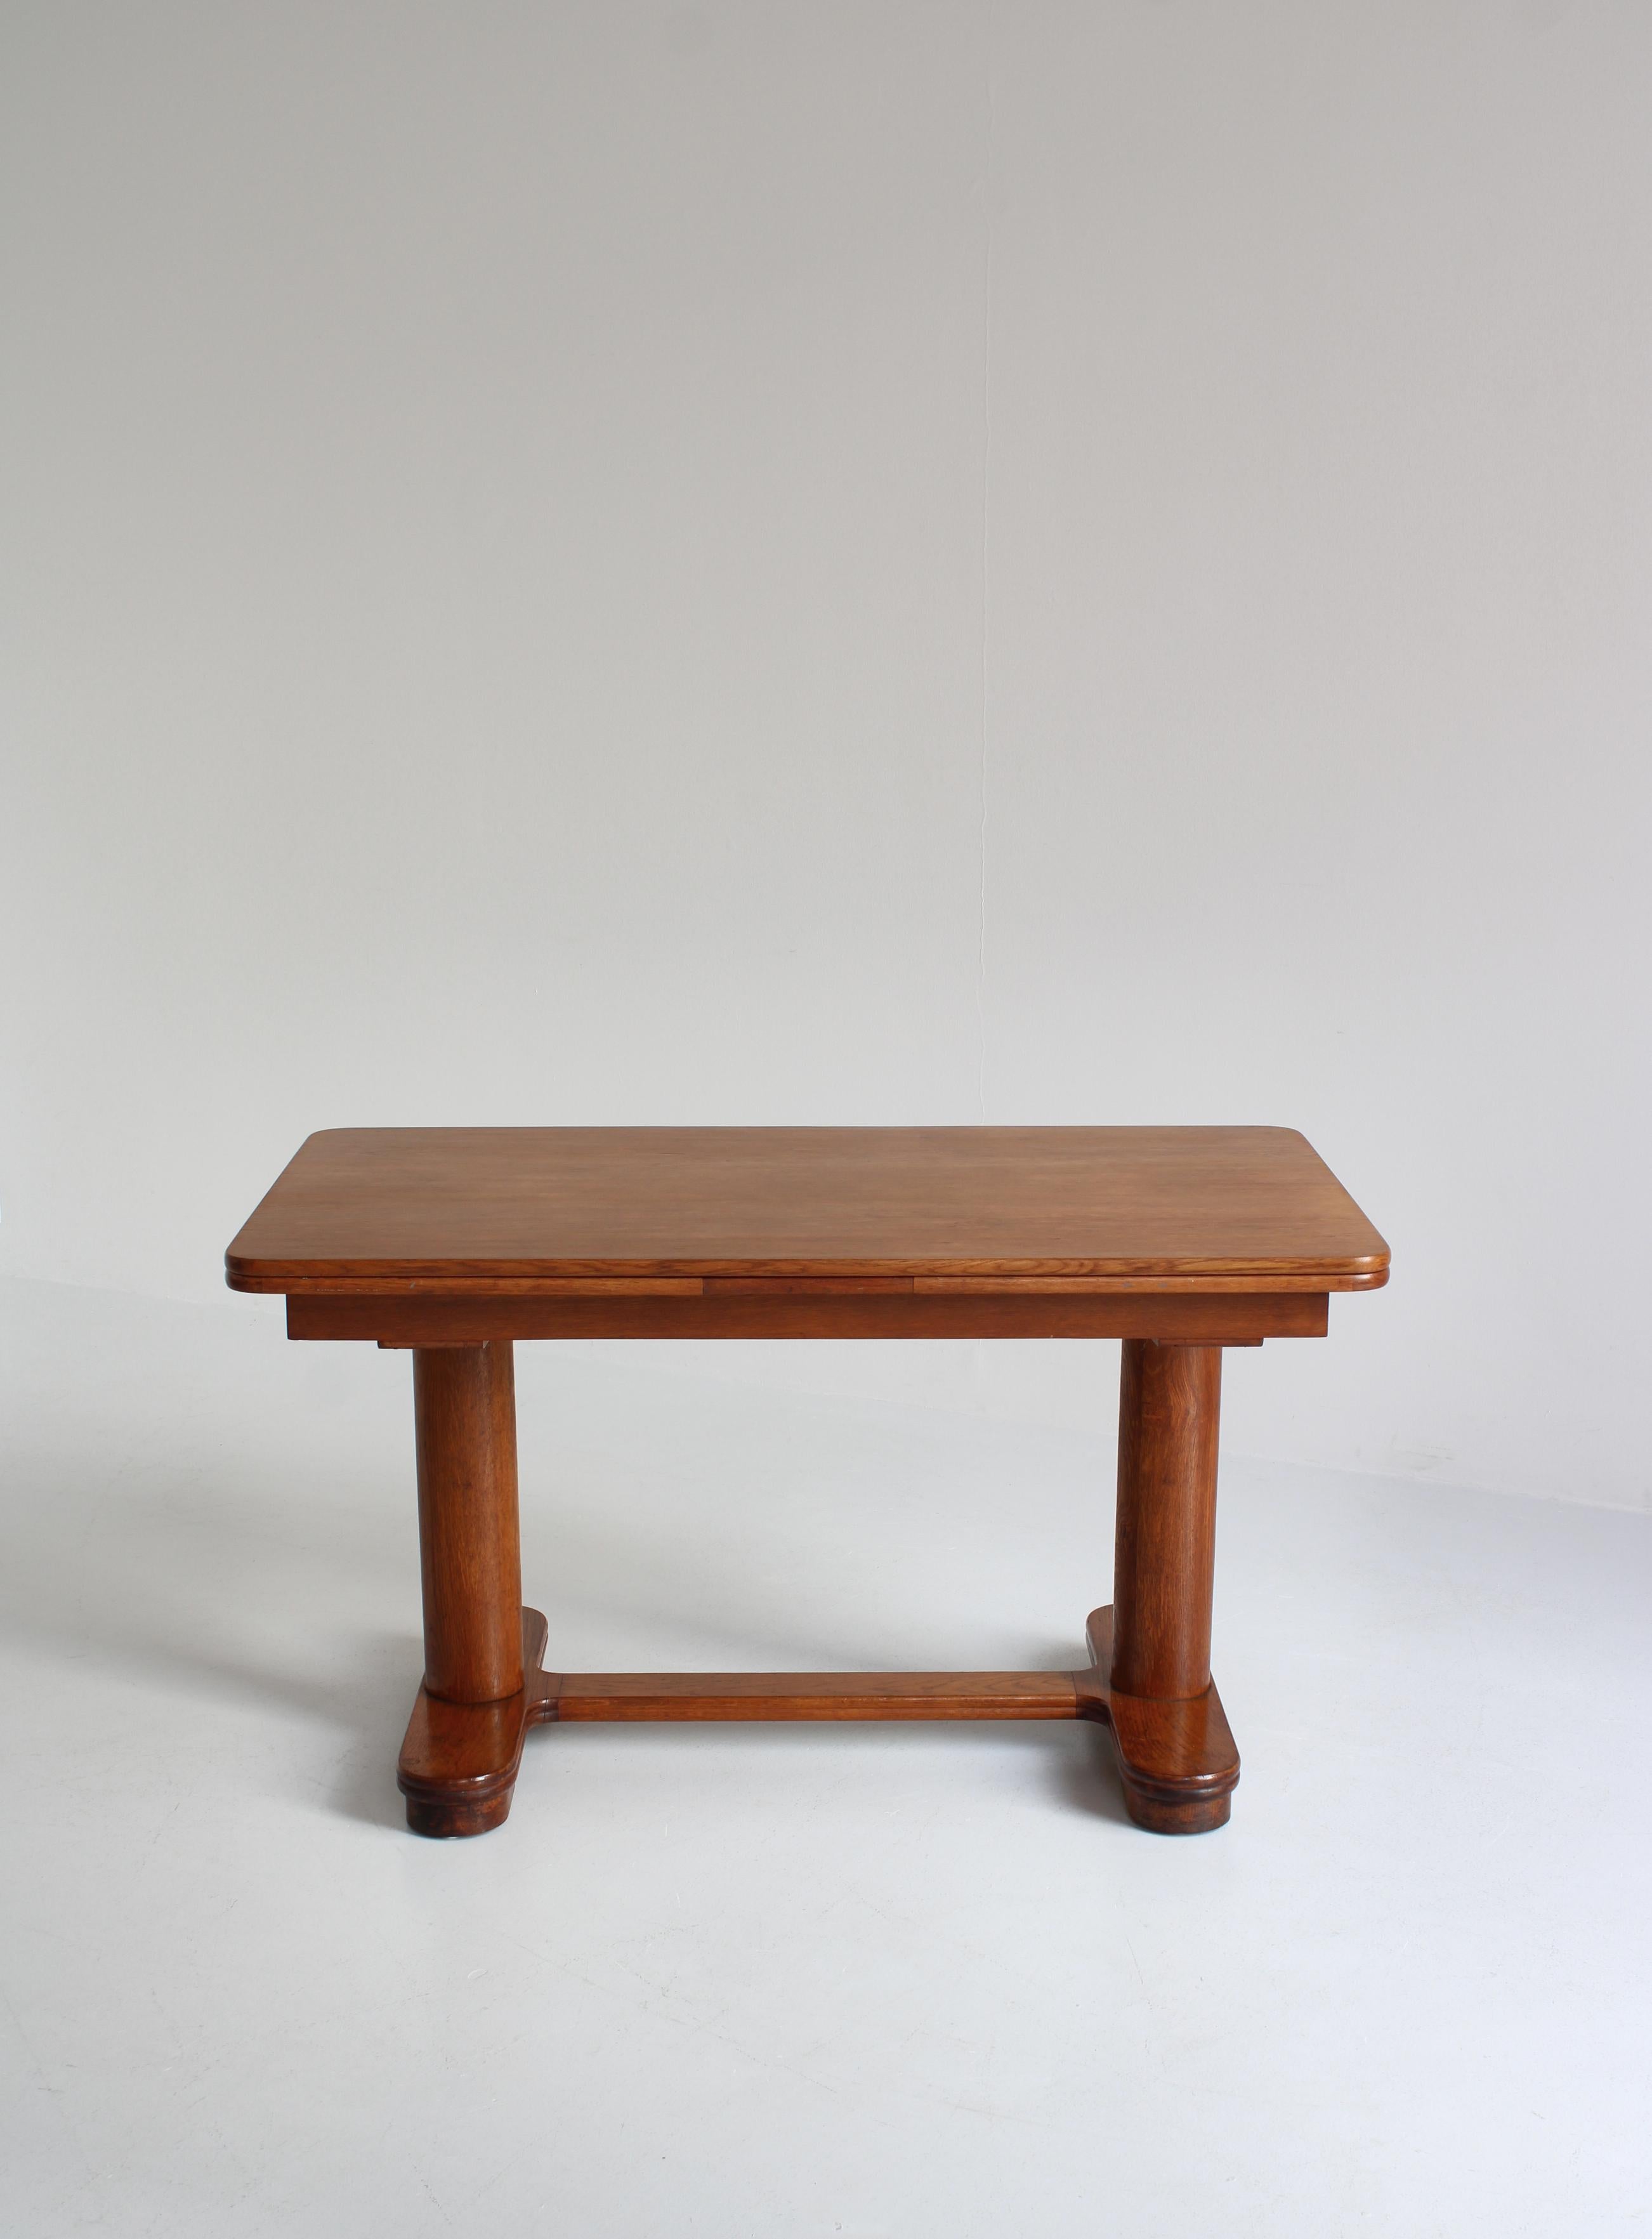 Art Deco Table by Danish Cabinetmaker in Patinated Oak, 1930s For Sale 2